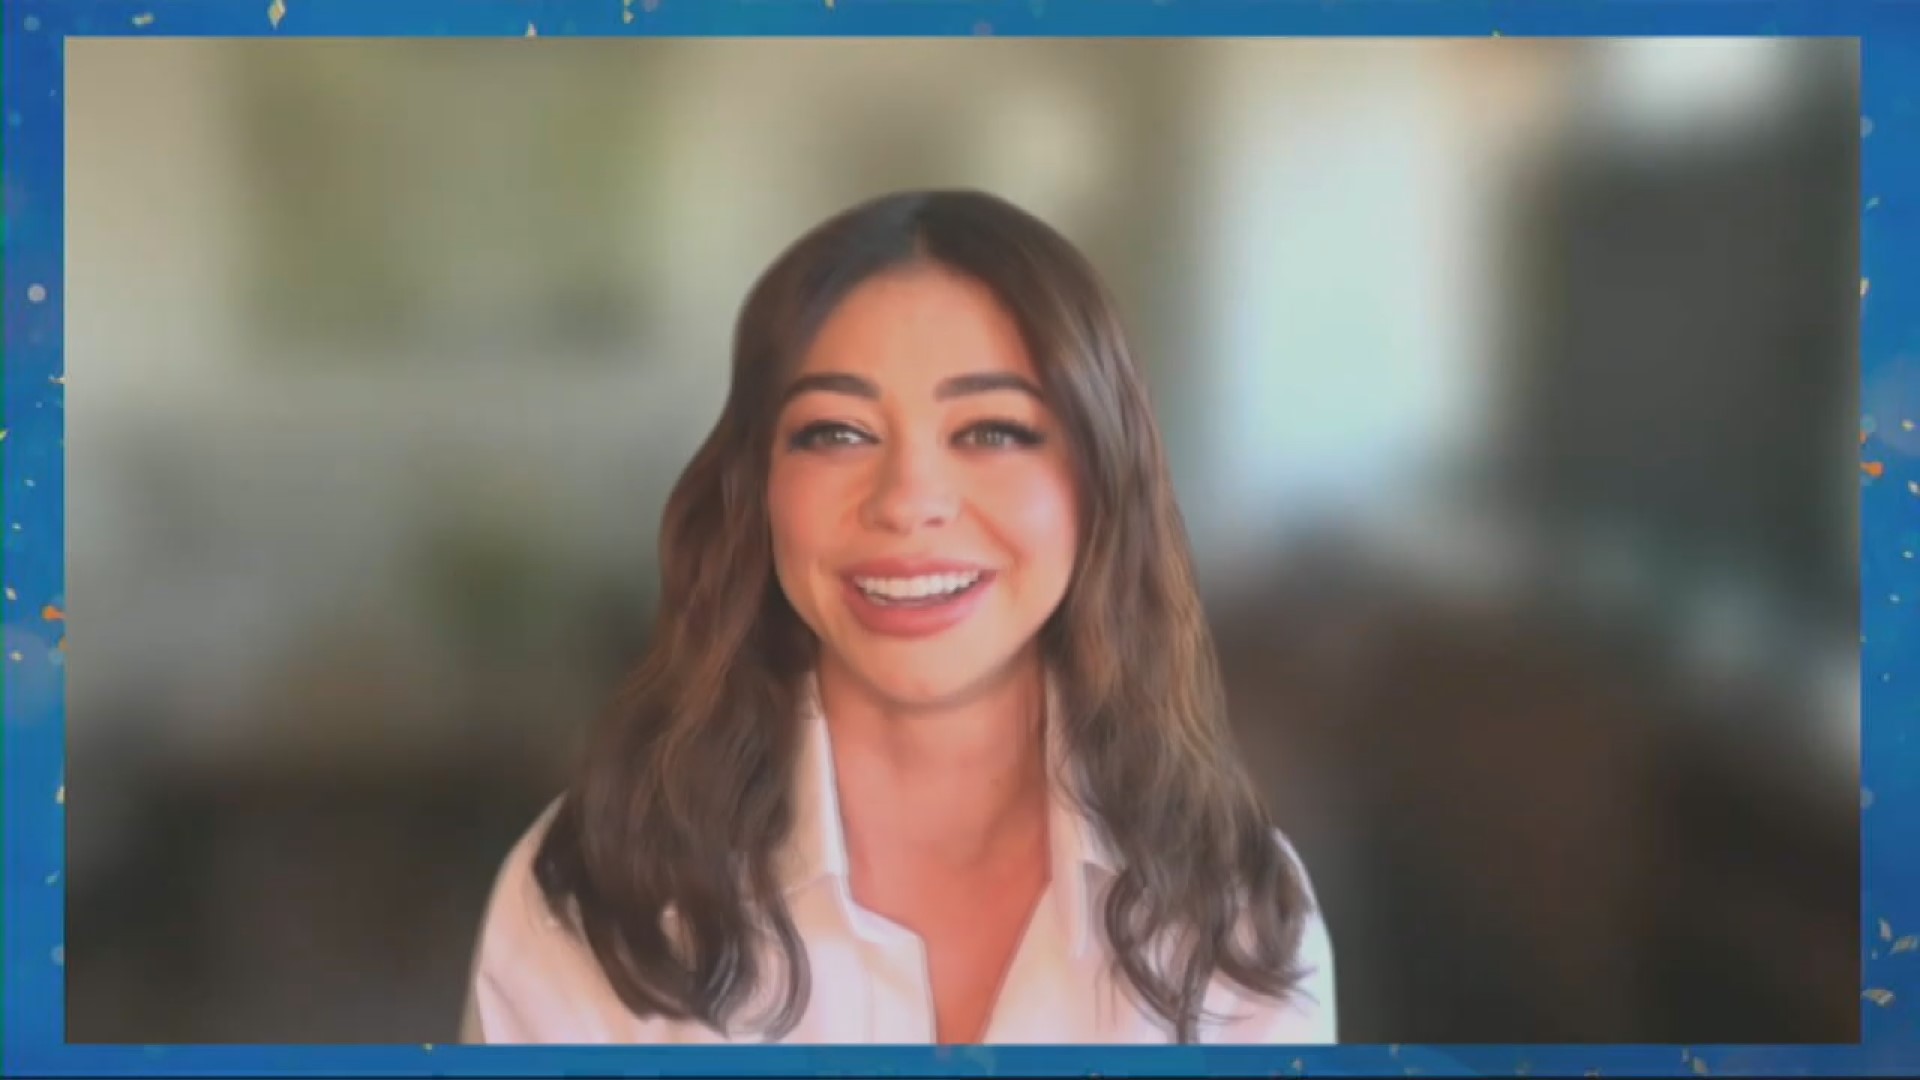 Modern Family actor Sarah Hyland talks with 13 News about her upcoming "Pitch Perfect" show and singing in the Macy's Day Parade!